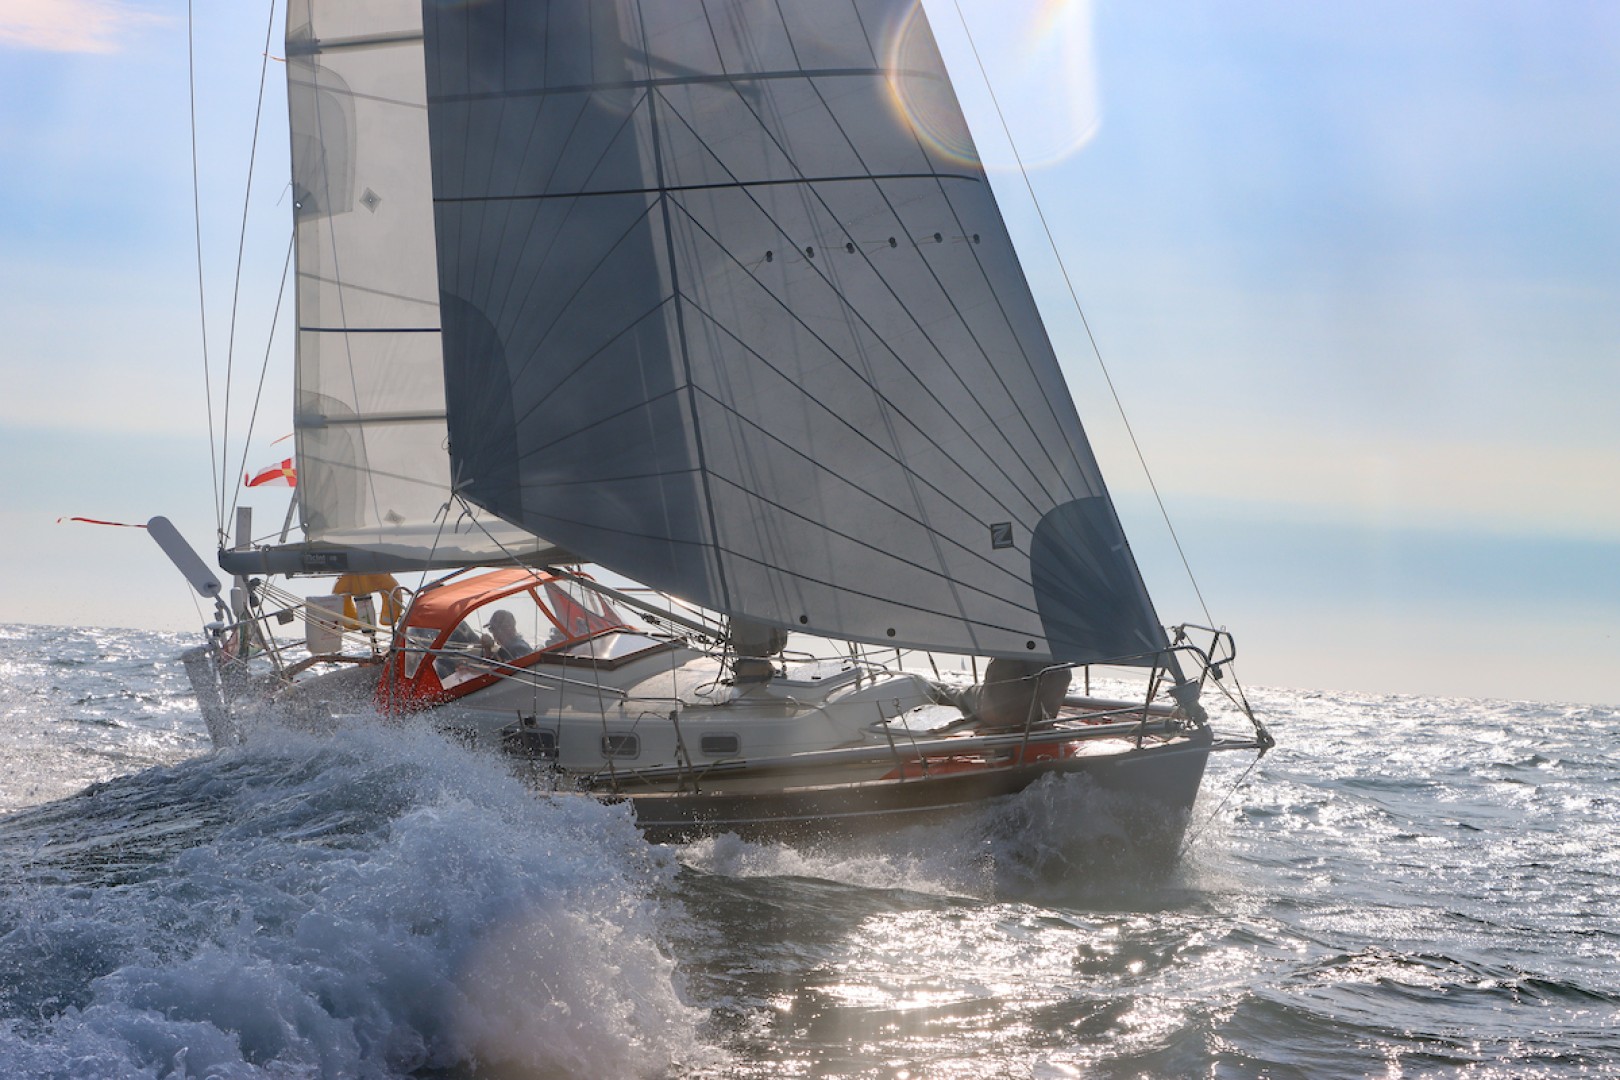 Jeremy Bagshaw's well-sailed Olleanna, the smallest boat of the fleet, has been holding her own against bigger, faster boats. Photo: Nora Havel/GGR2022